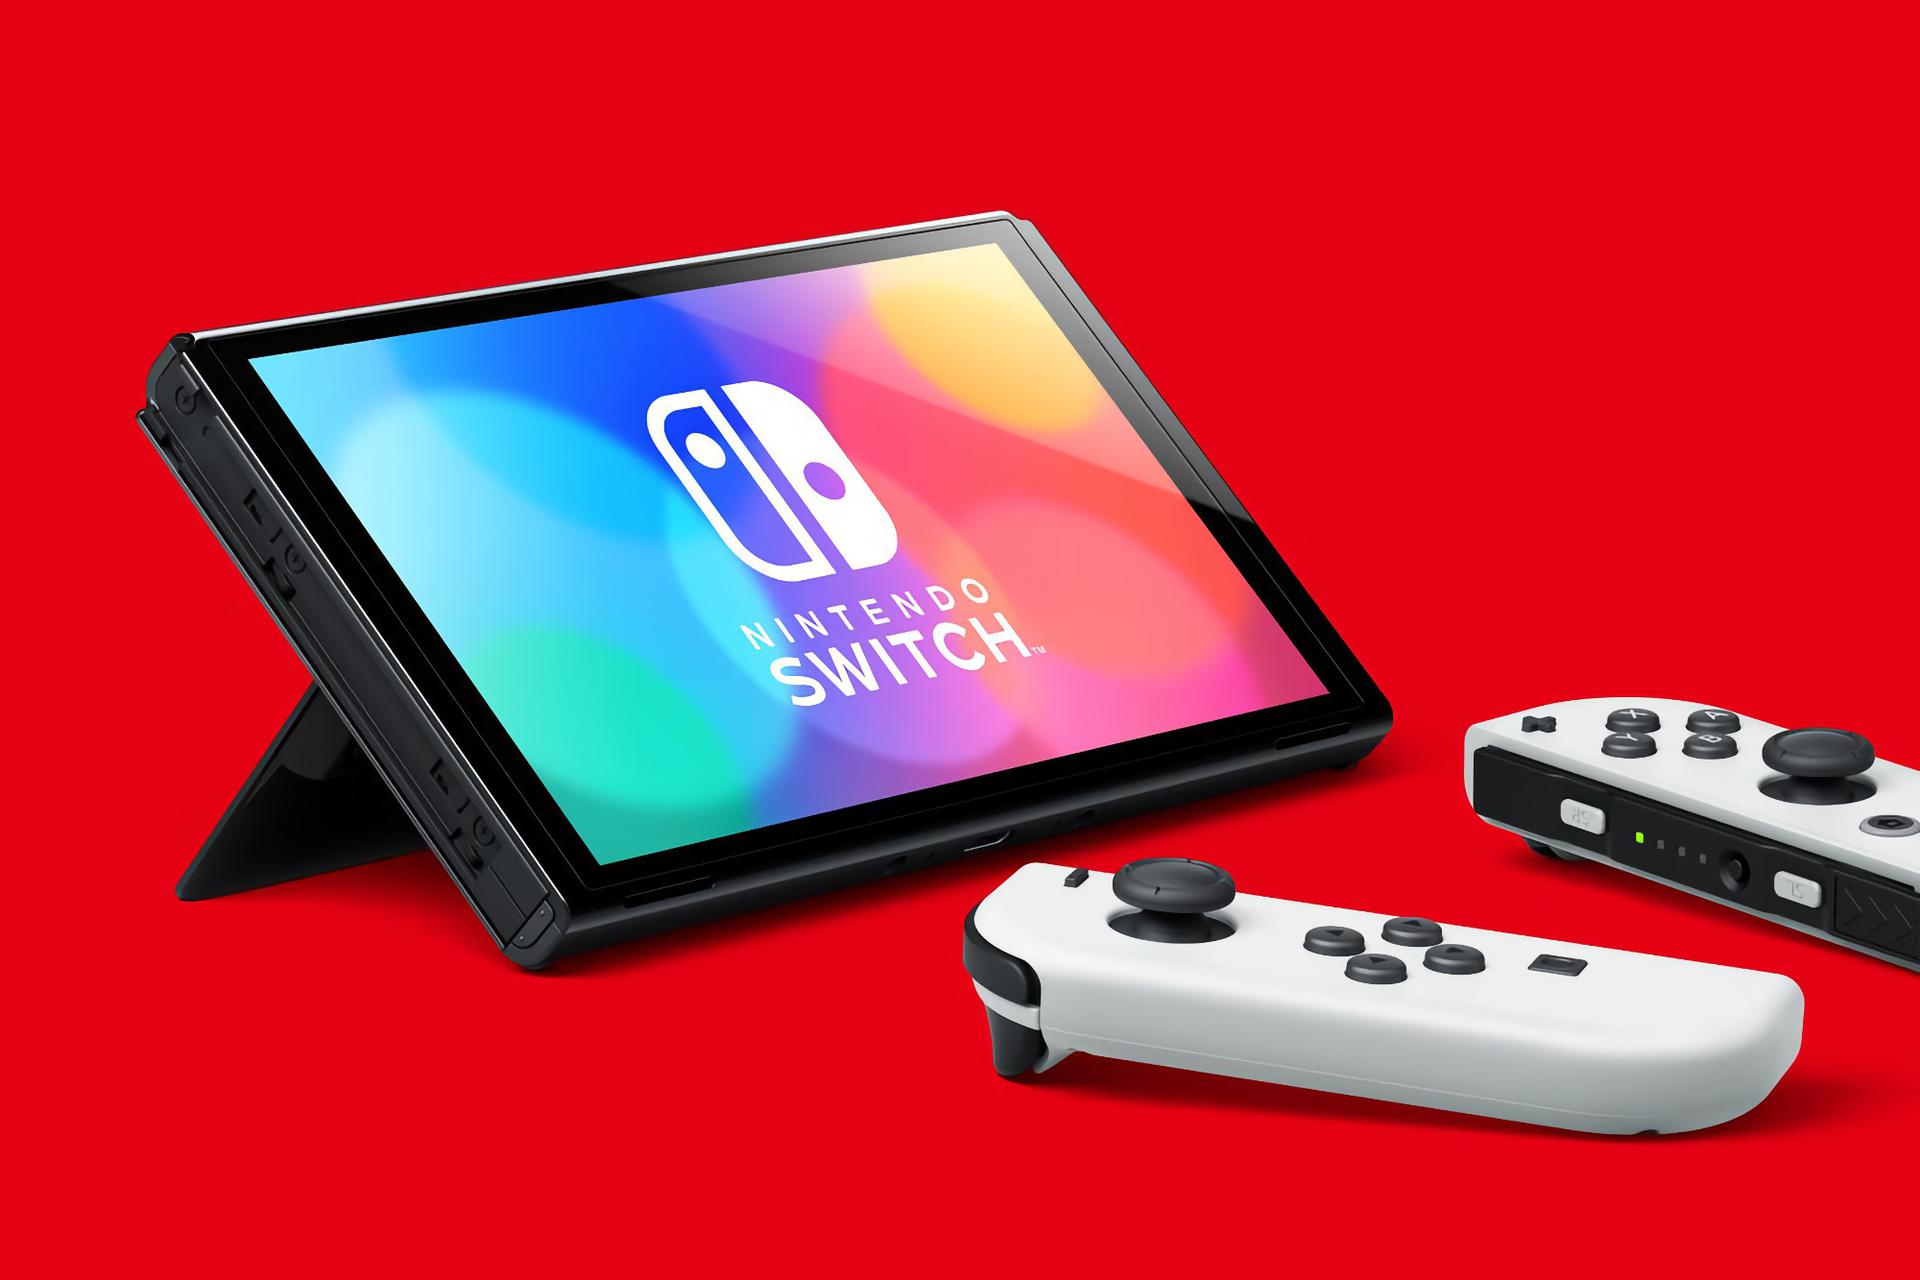 Rumor: Nintendo will release Switch Pro later this year, with 4K gaming support